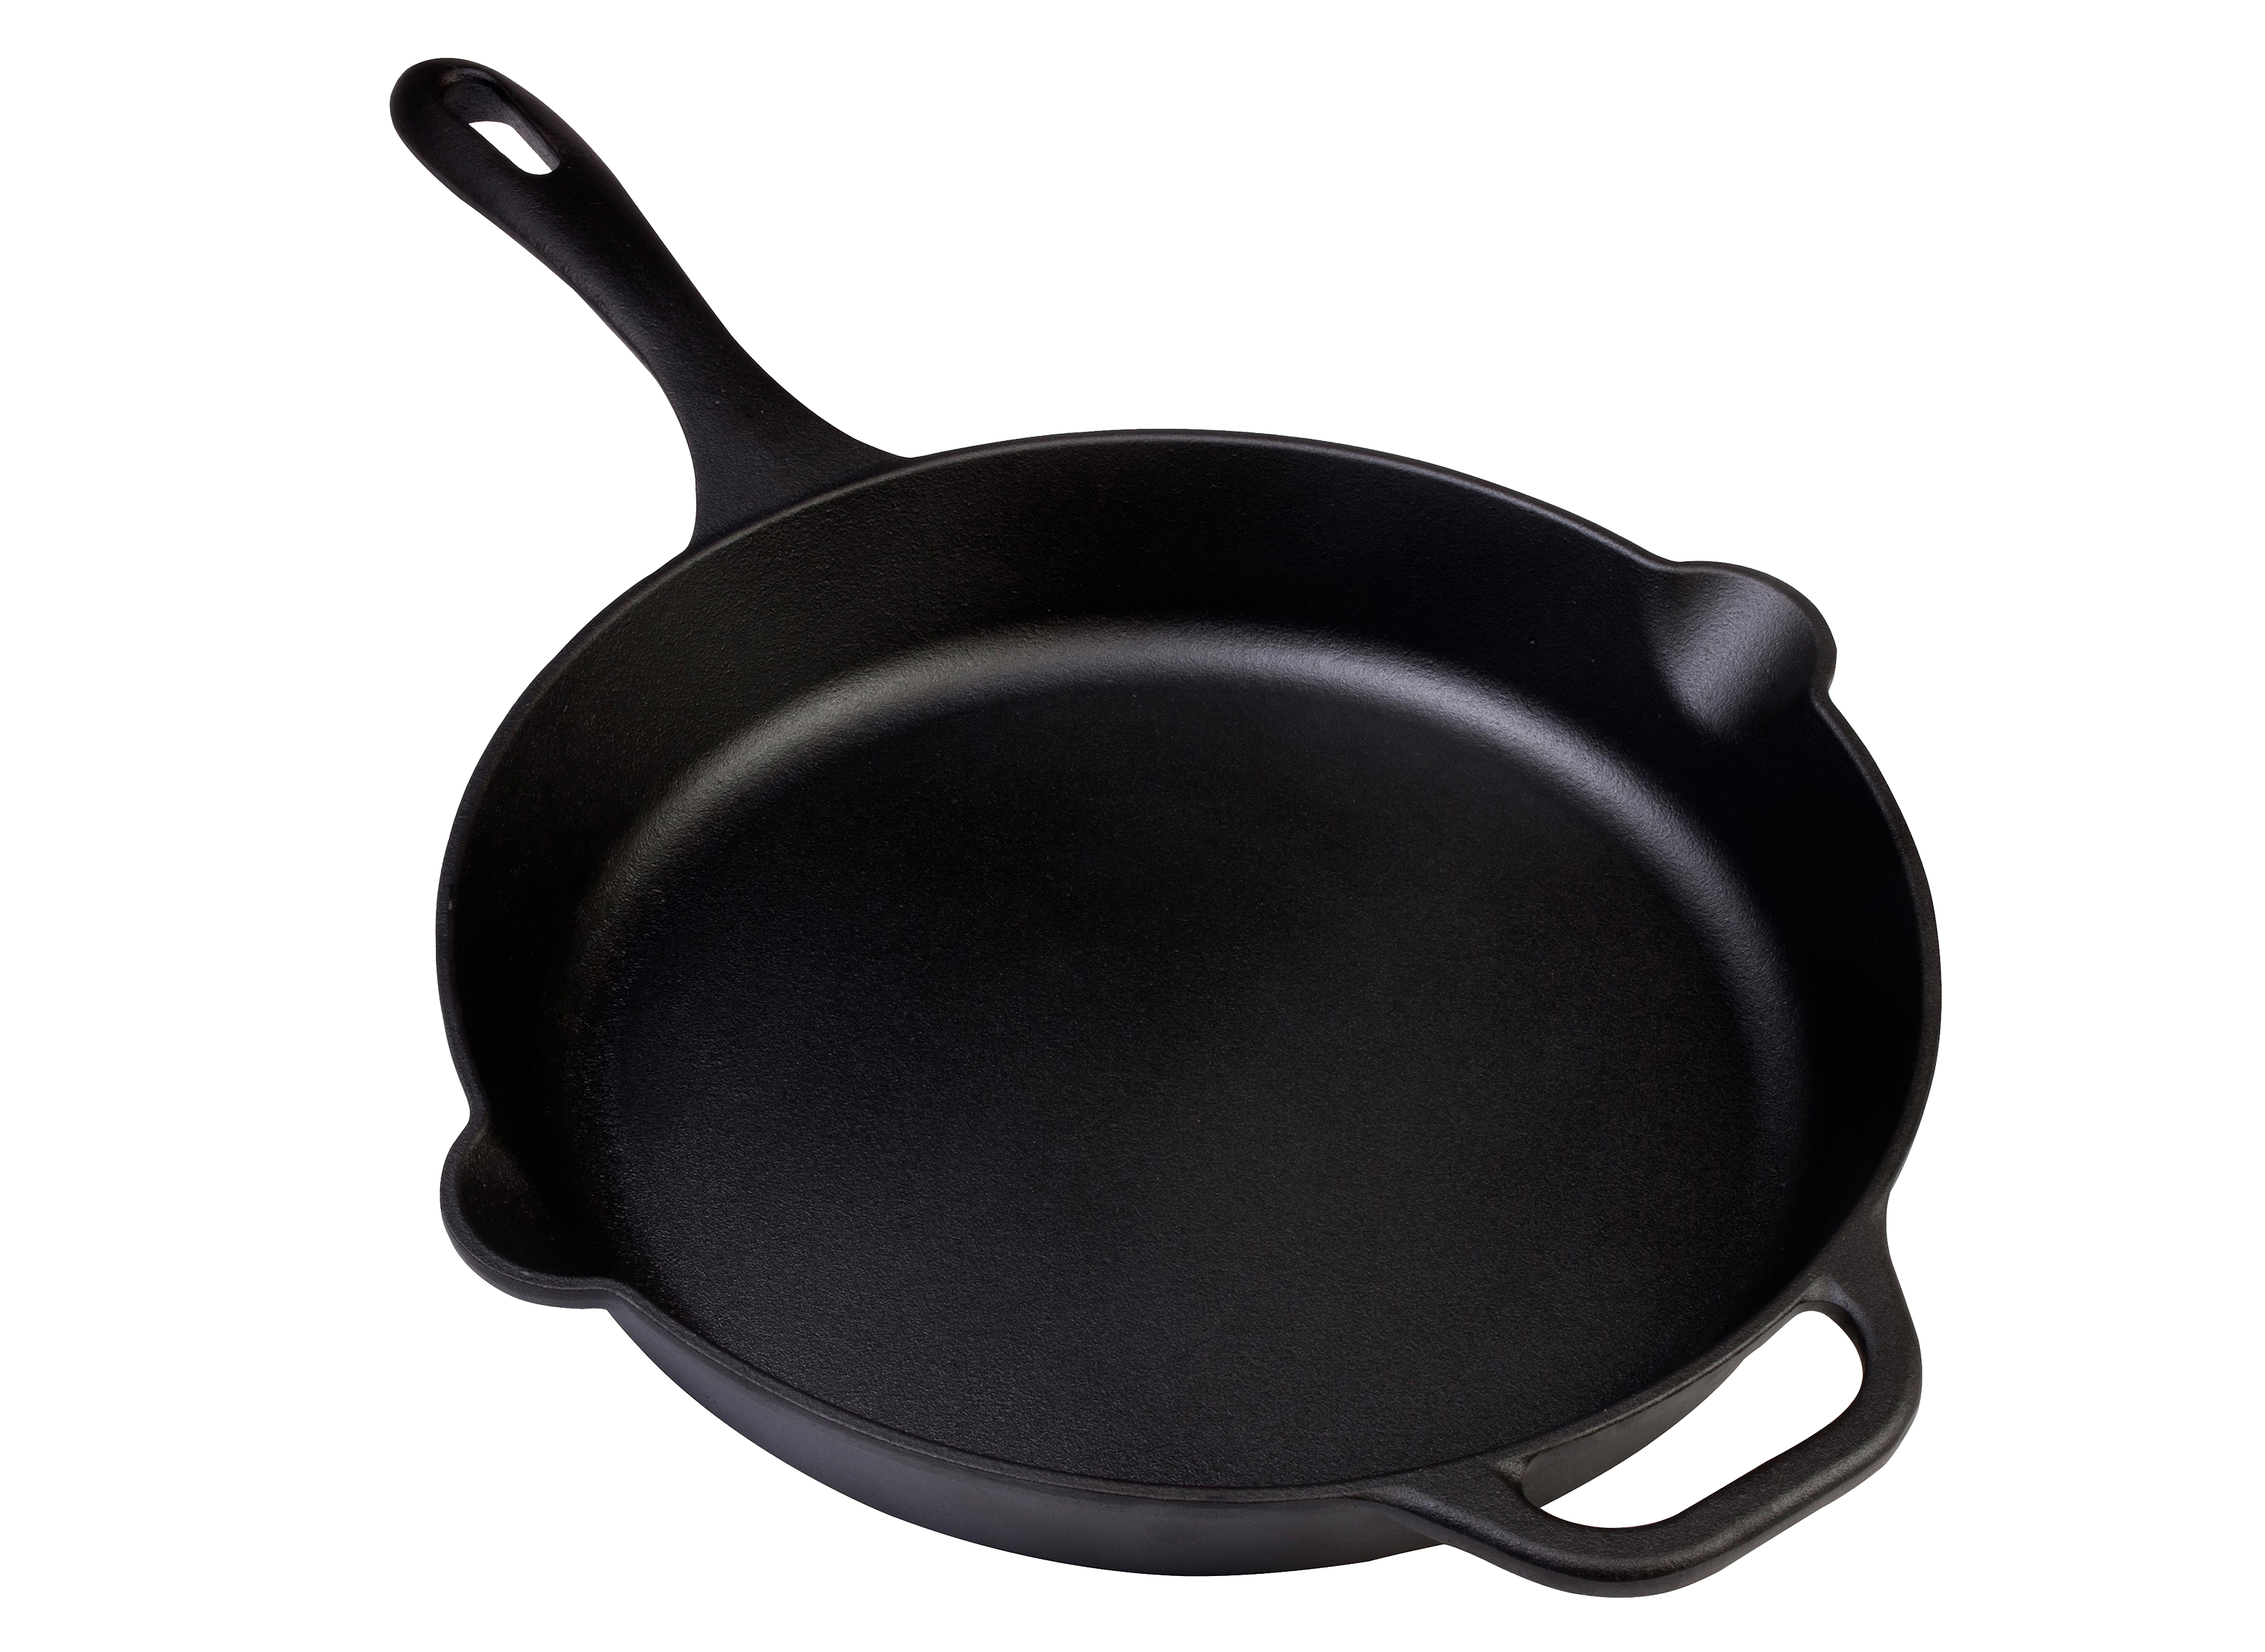 Food Network Pre-Seasoned Cast-Iron Cookware Review - Consumer Reports